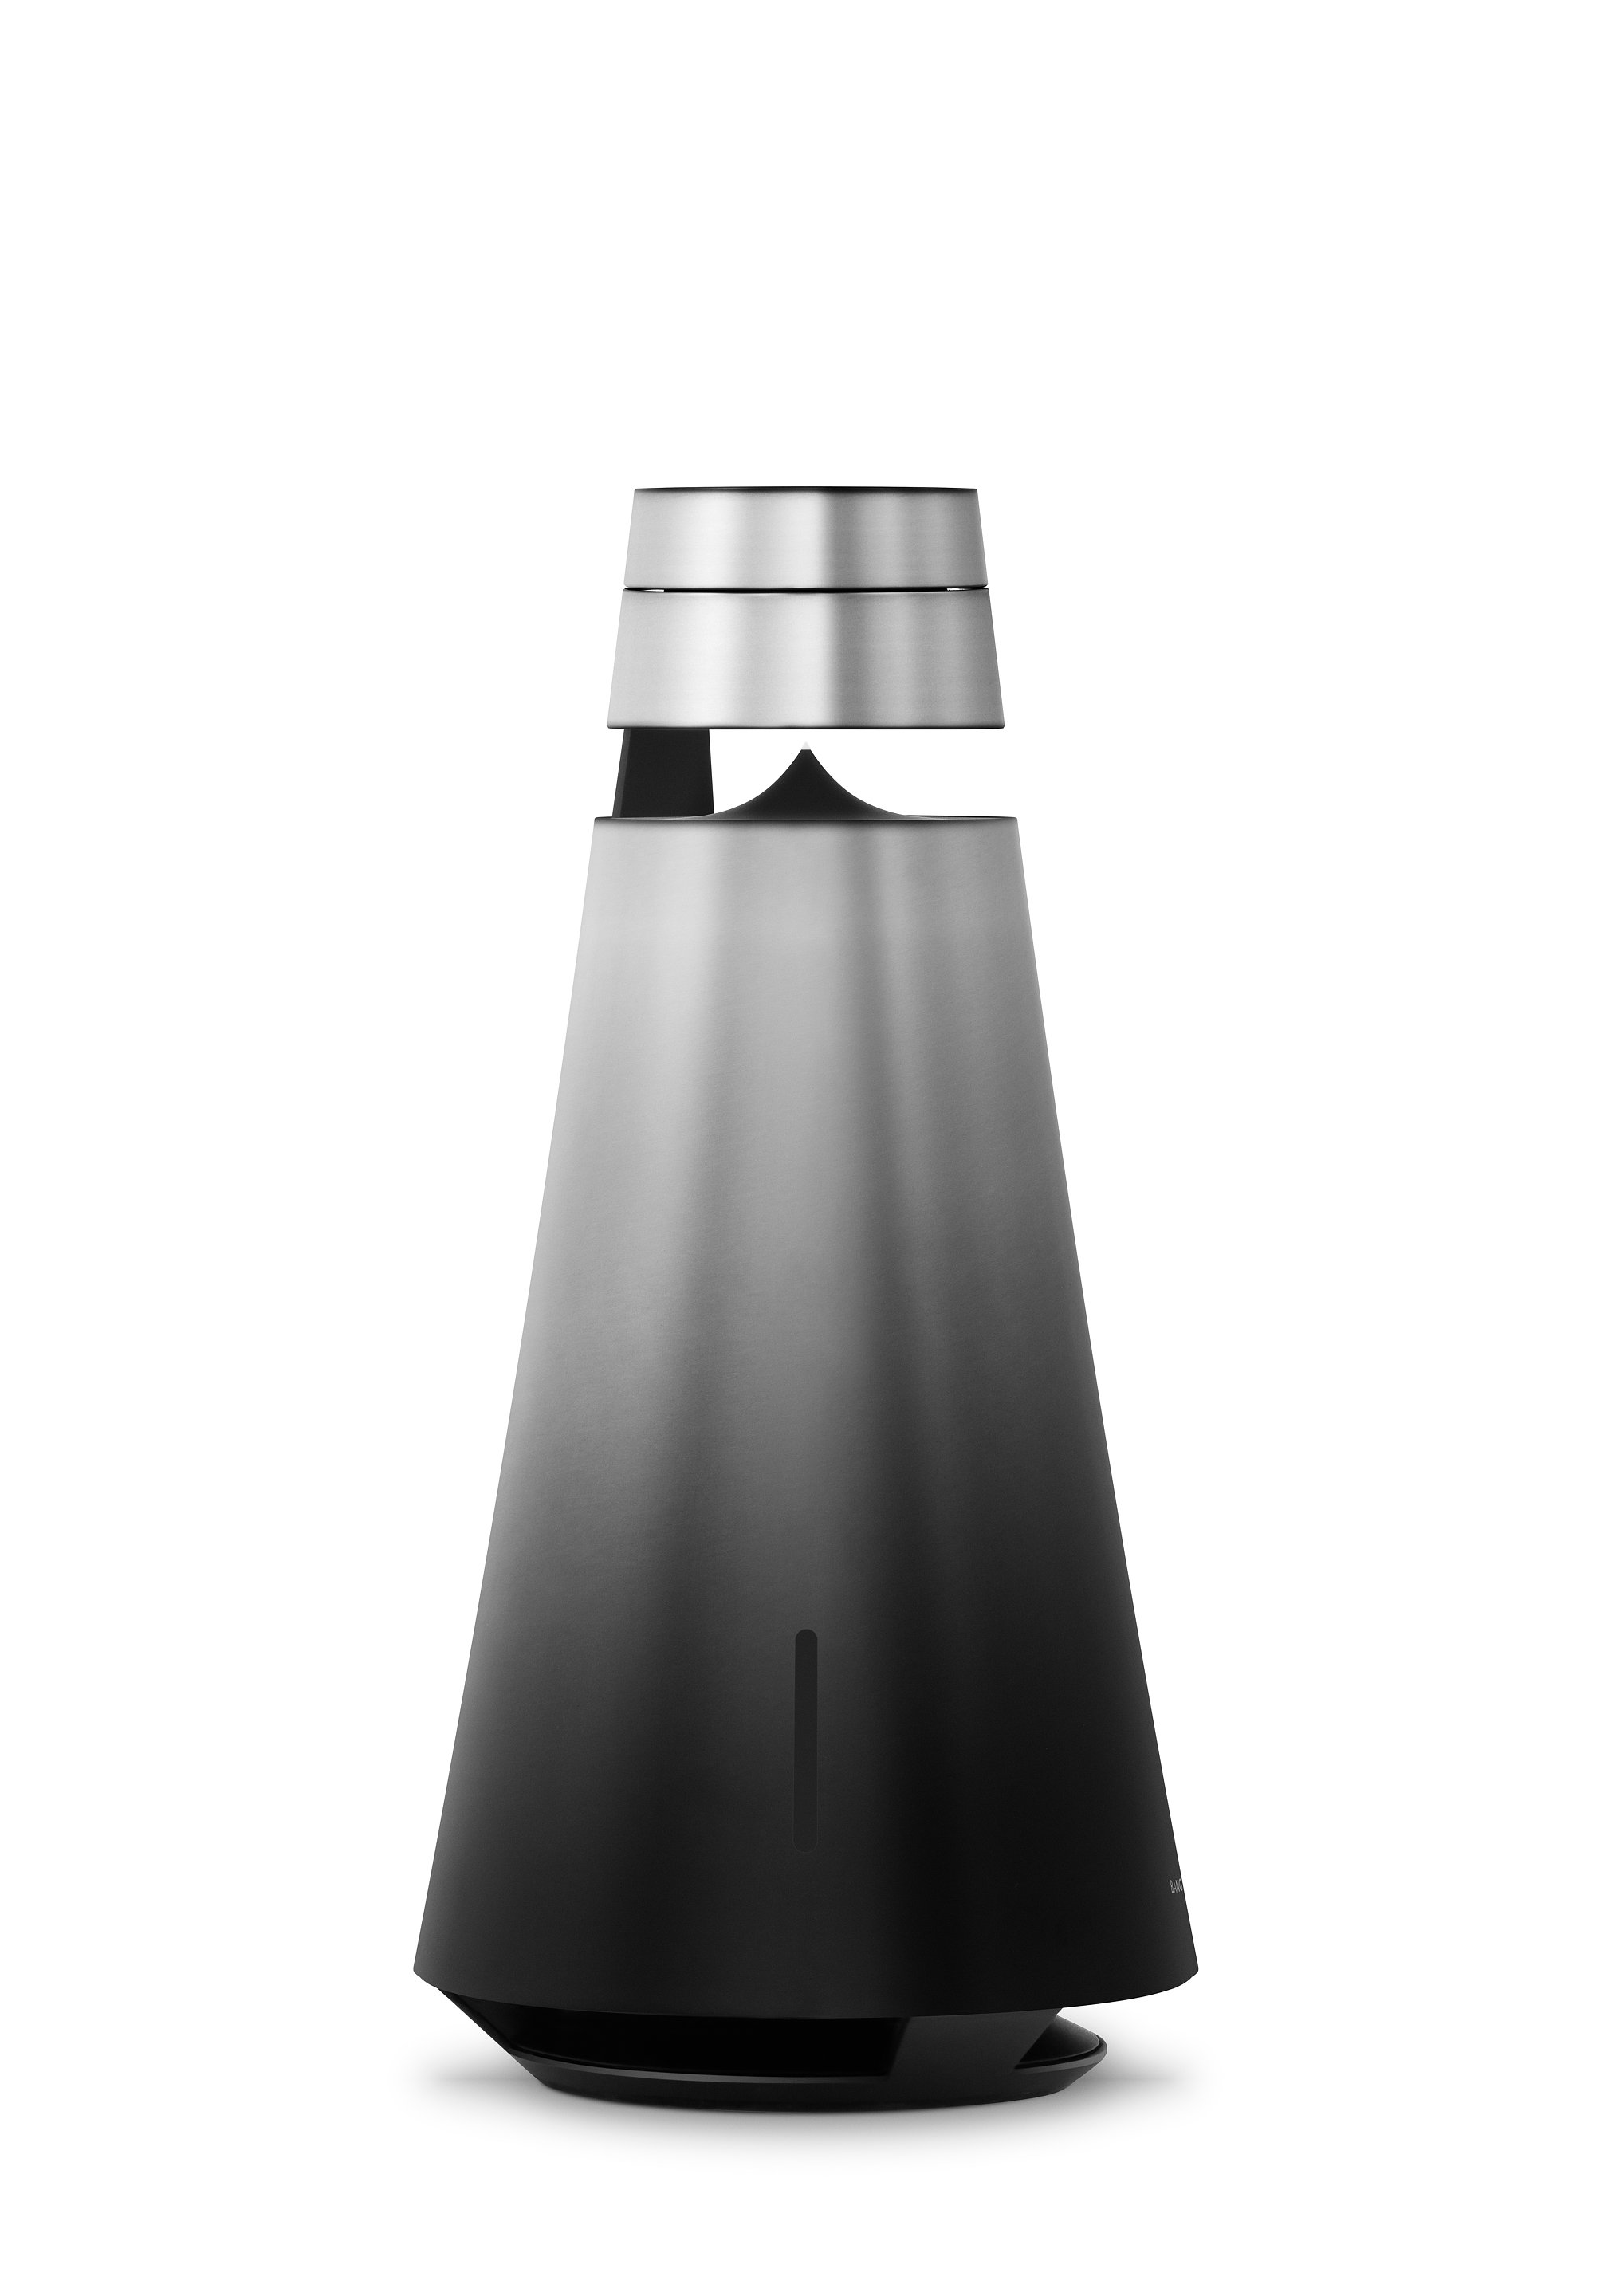  Beosound 1 New York Edition" class = "aimg fimg lazyload" /> </source> [194594] [194594] ] </p>
<figure class=